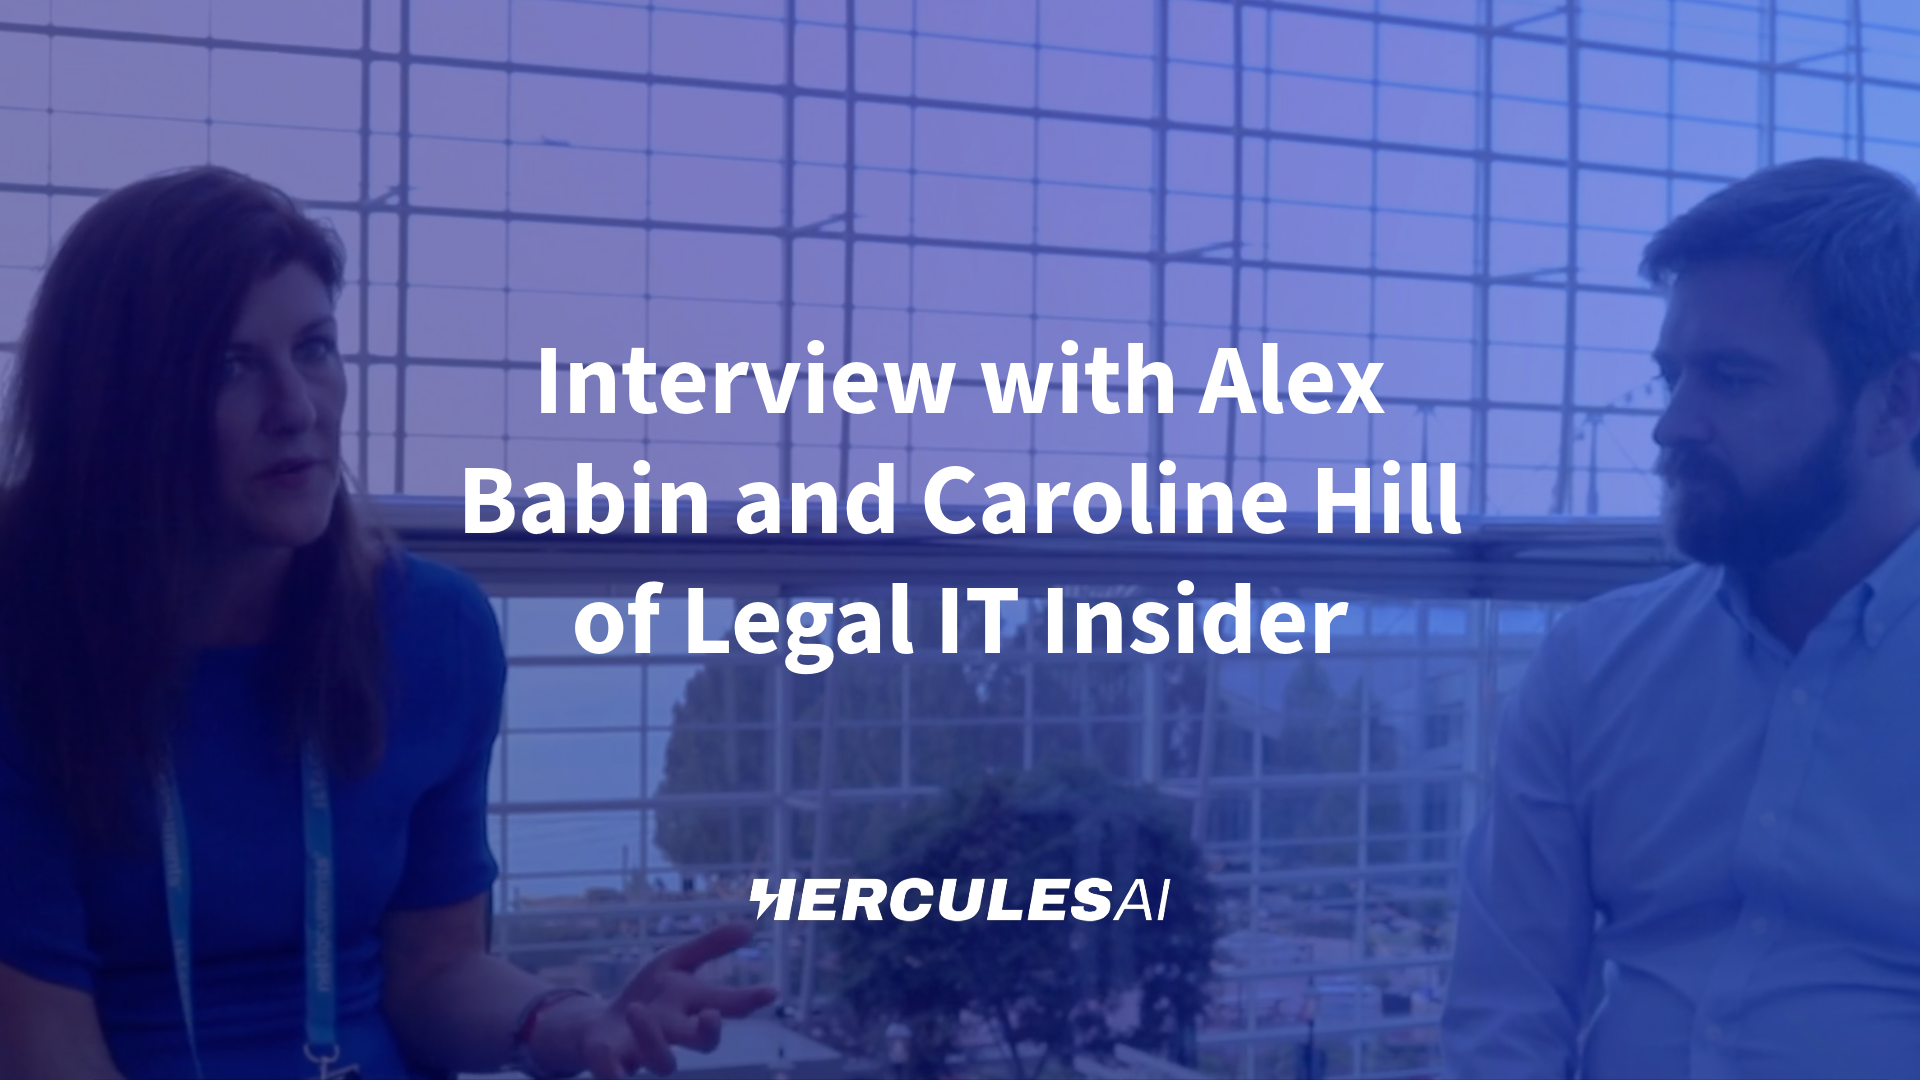 Interview with Alex Babin and Caroline Hill of Legal IT Insider